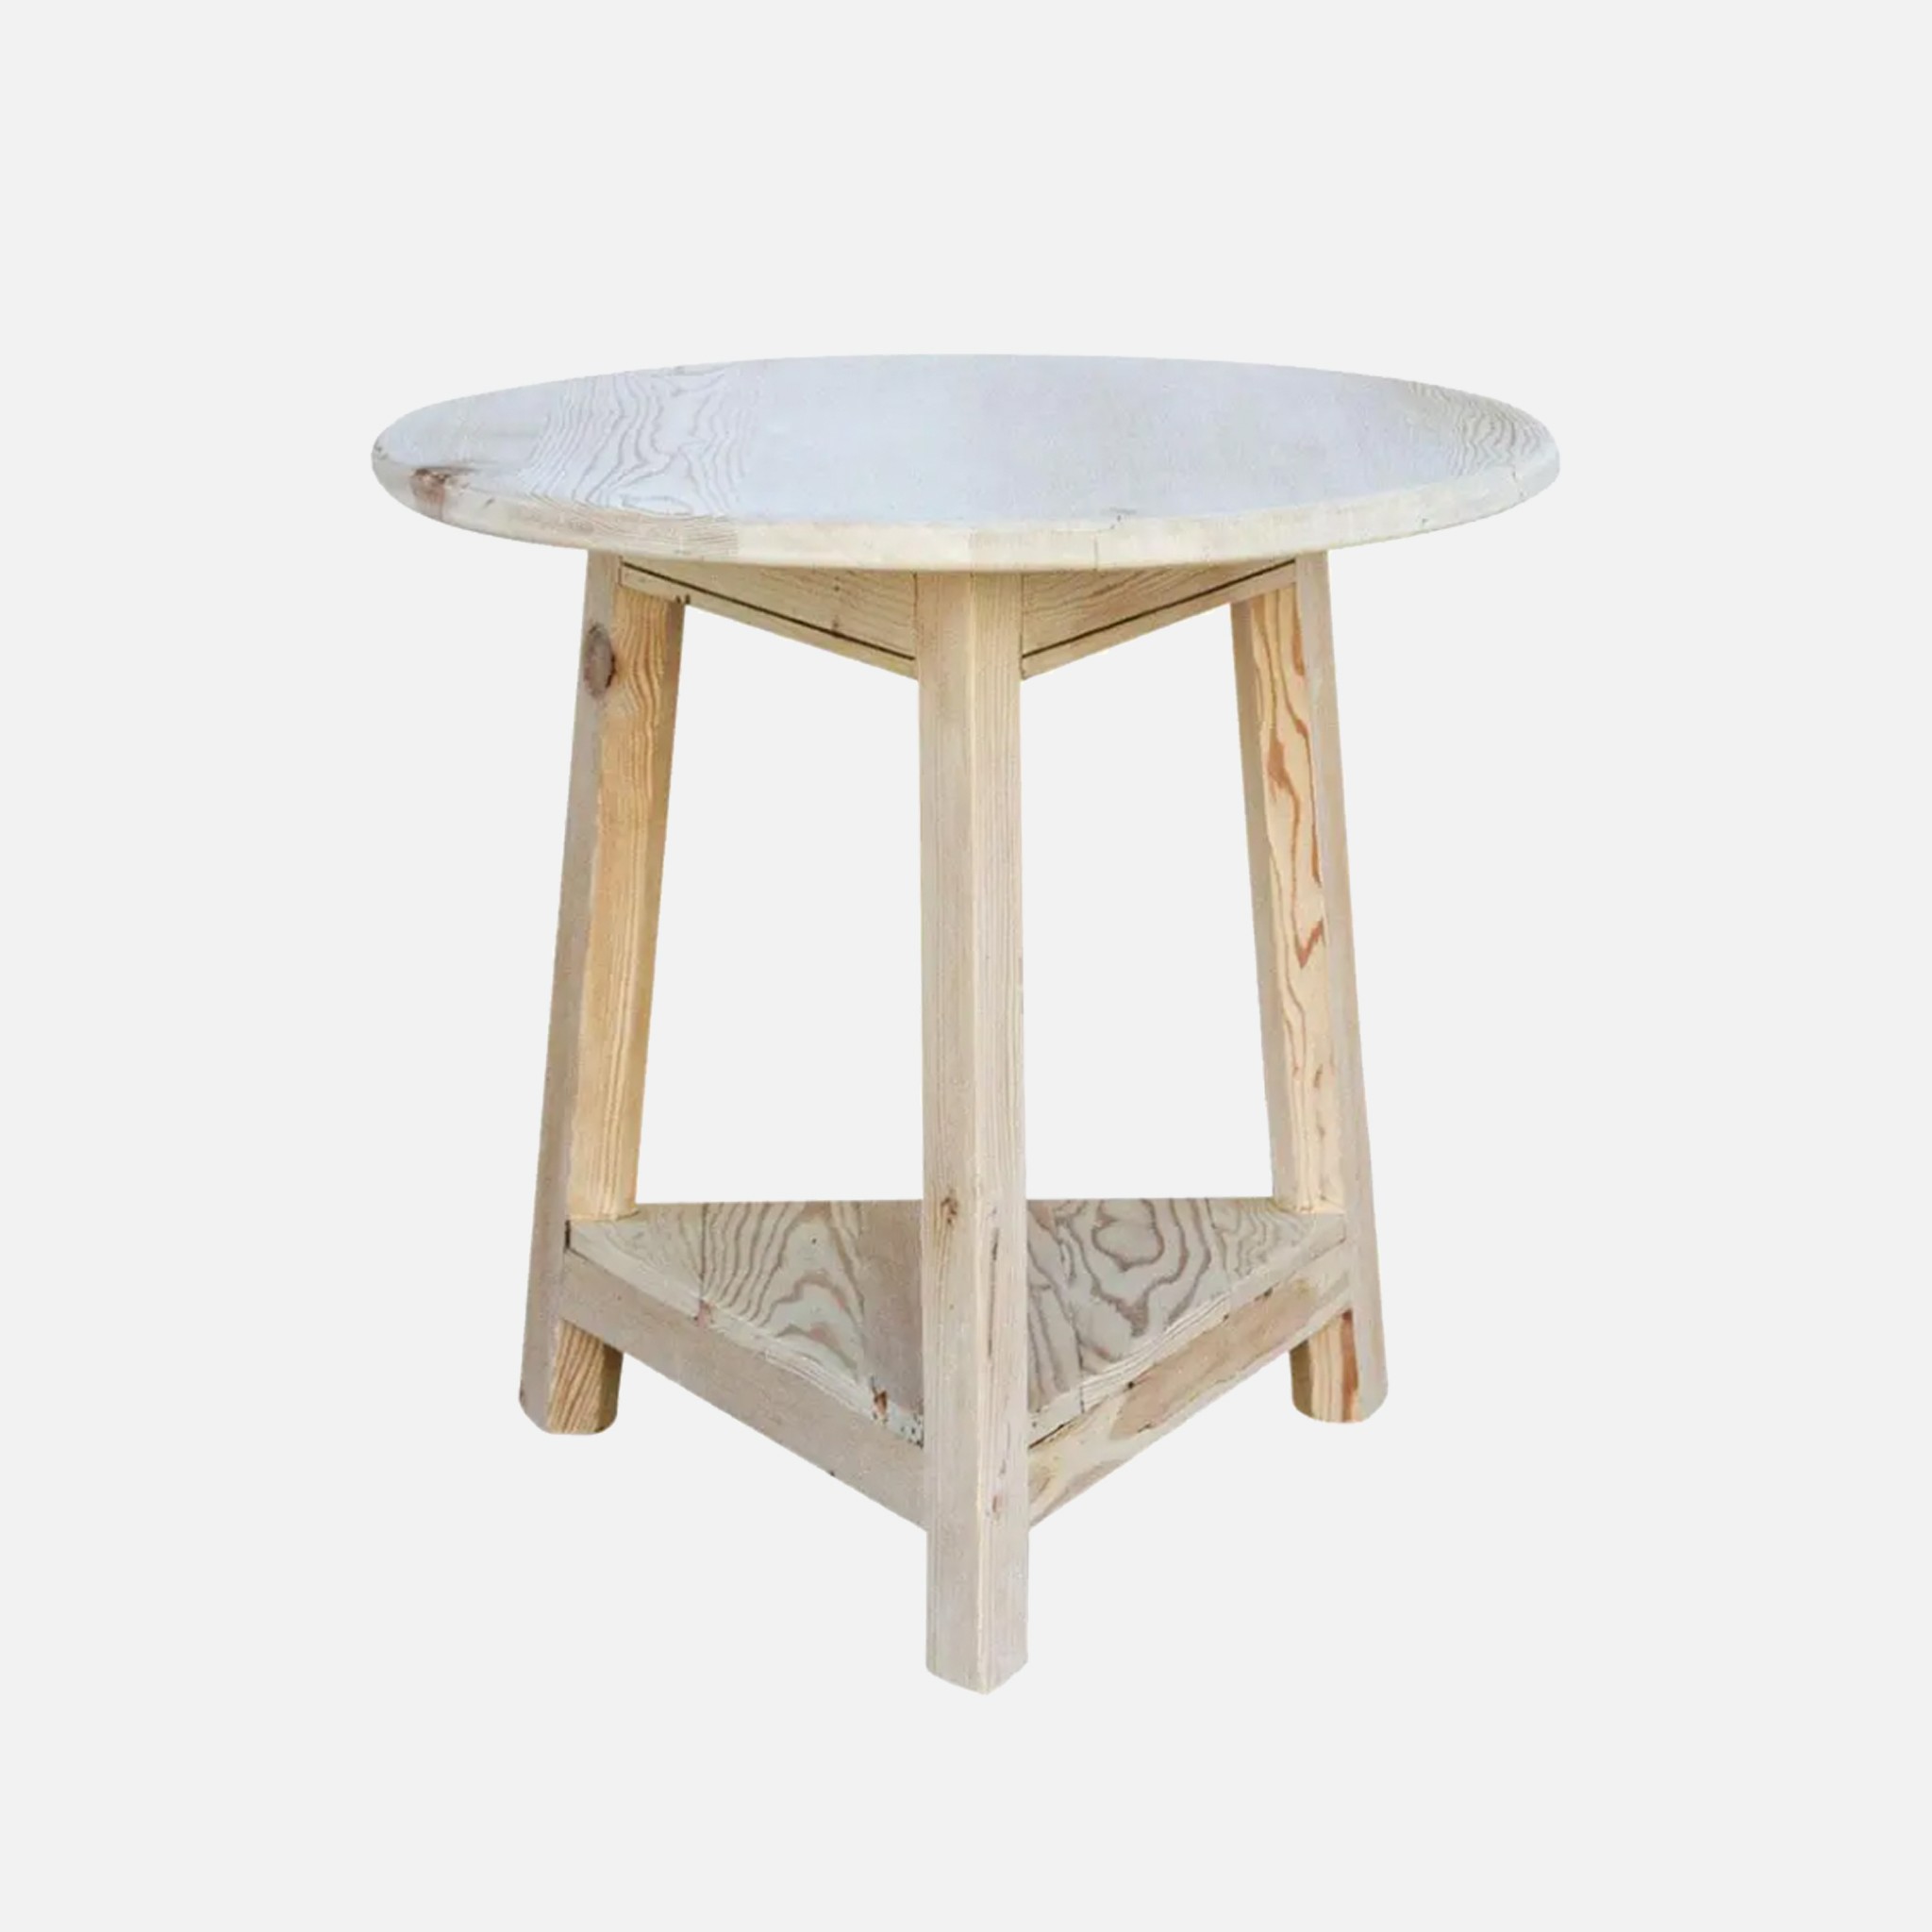 The image of an Chairish Cricket Table product